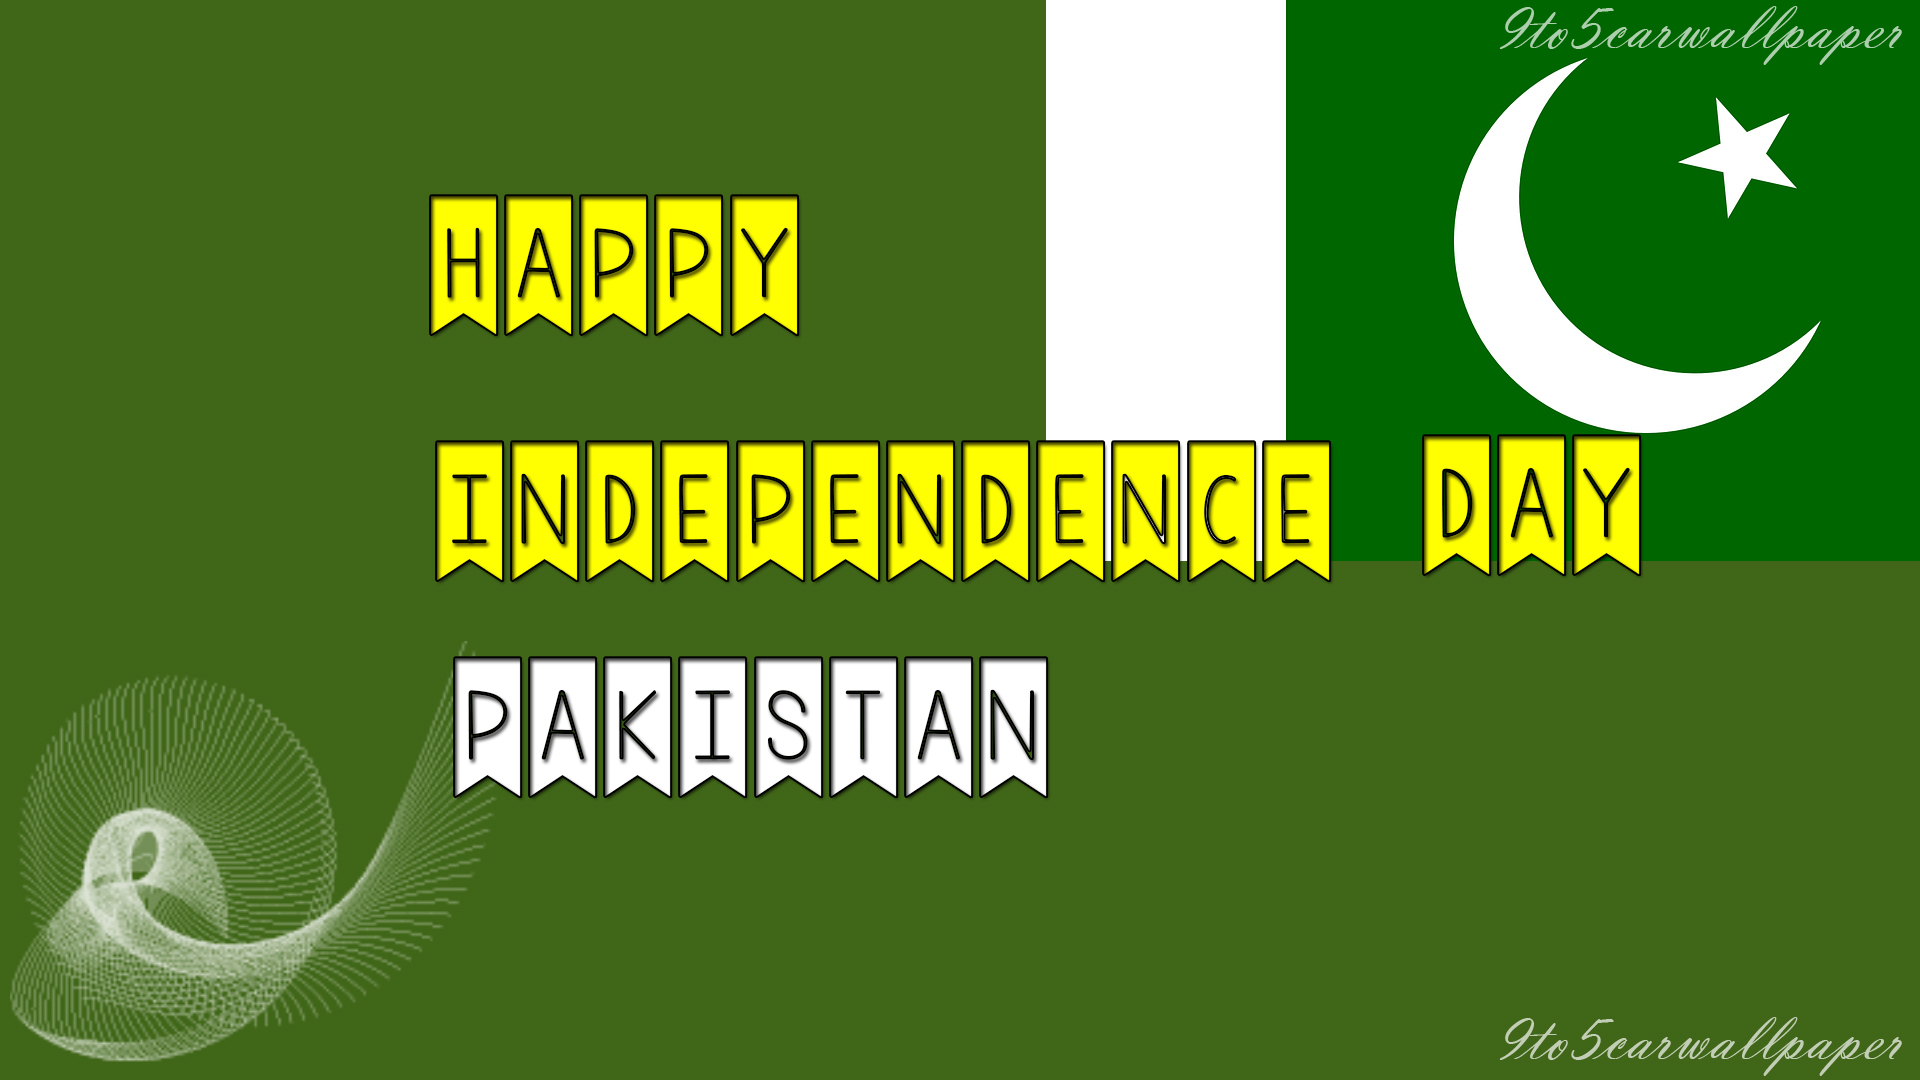 Happy Independence Day Pakistan Wallpapers - Graphic Design , HD Wallpaper & Backgrounds